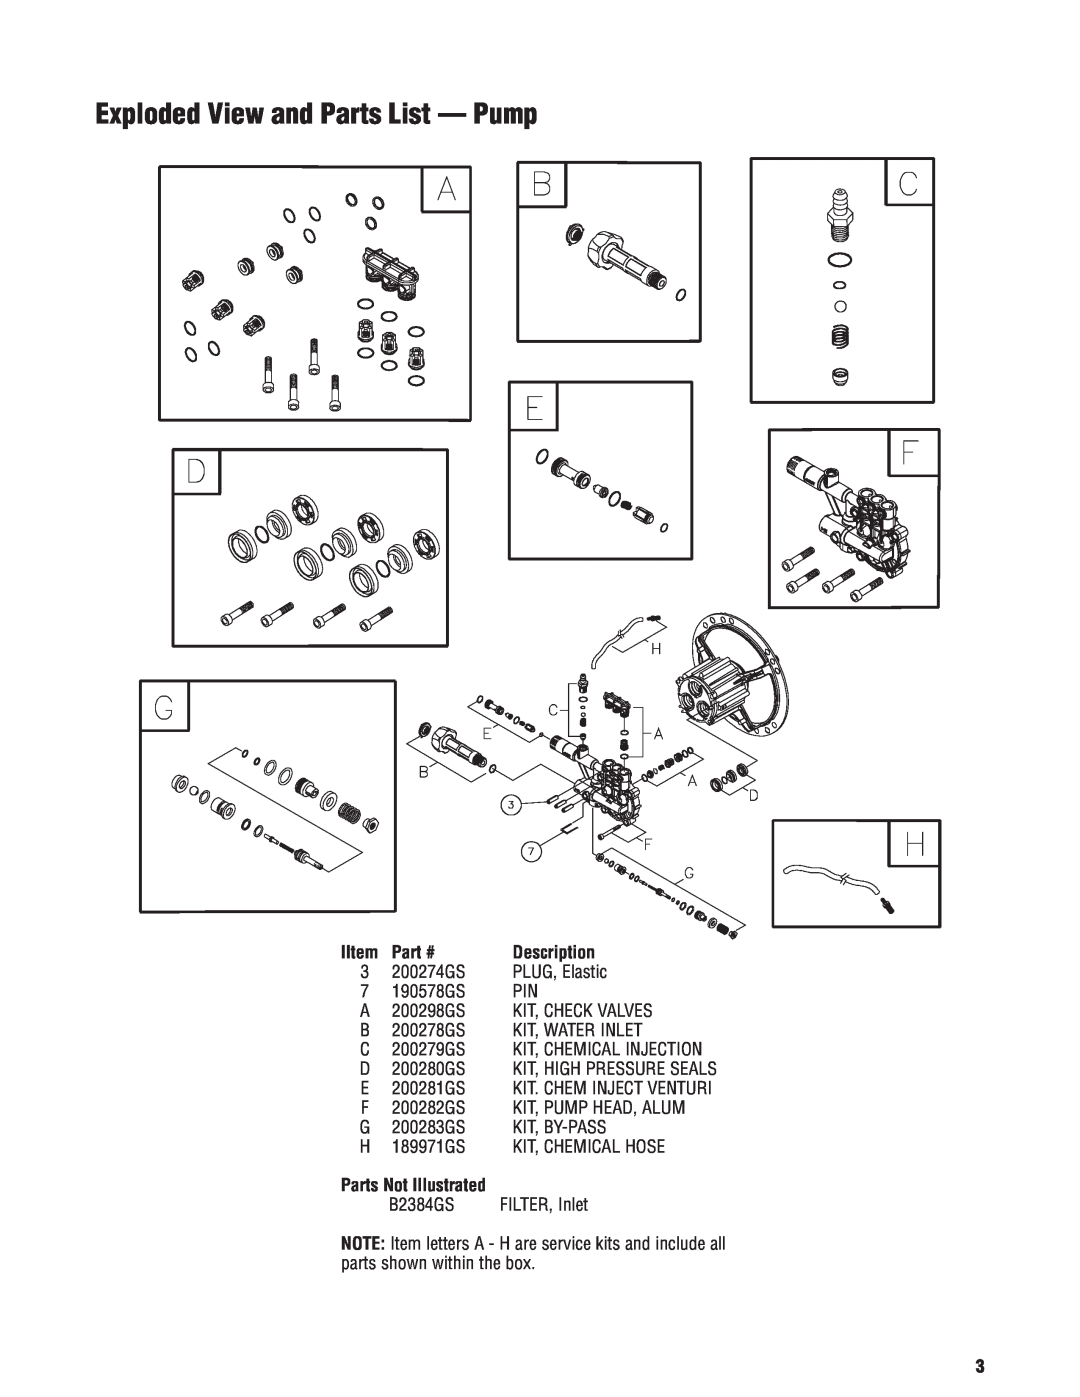 Briggs & Stratton 20305 manual Exploded View and Parts List - Pump, IItem, Description 